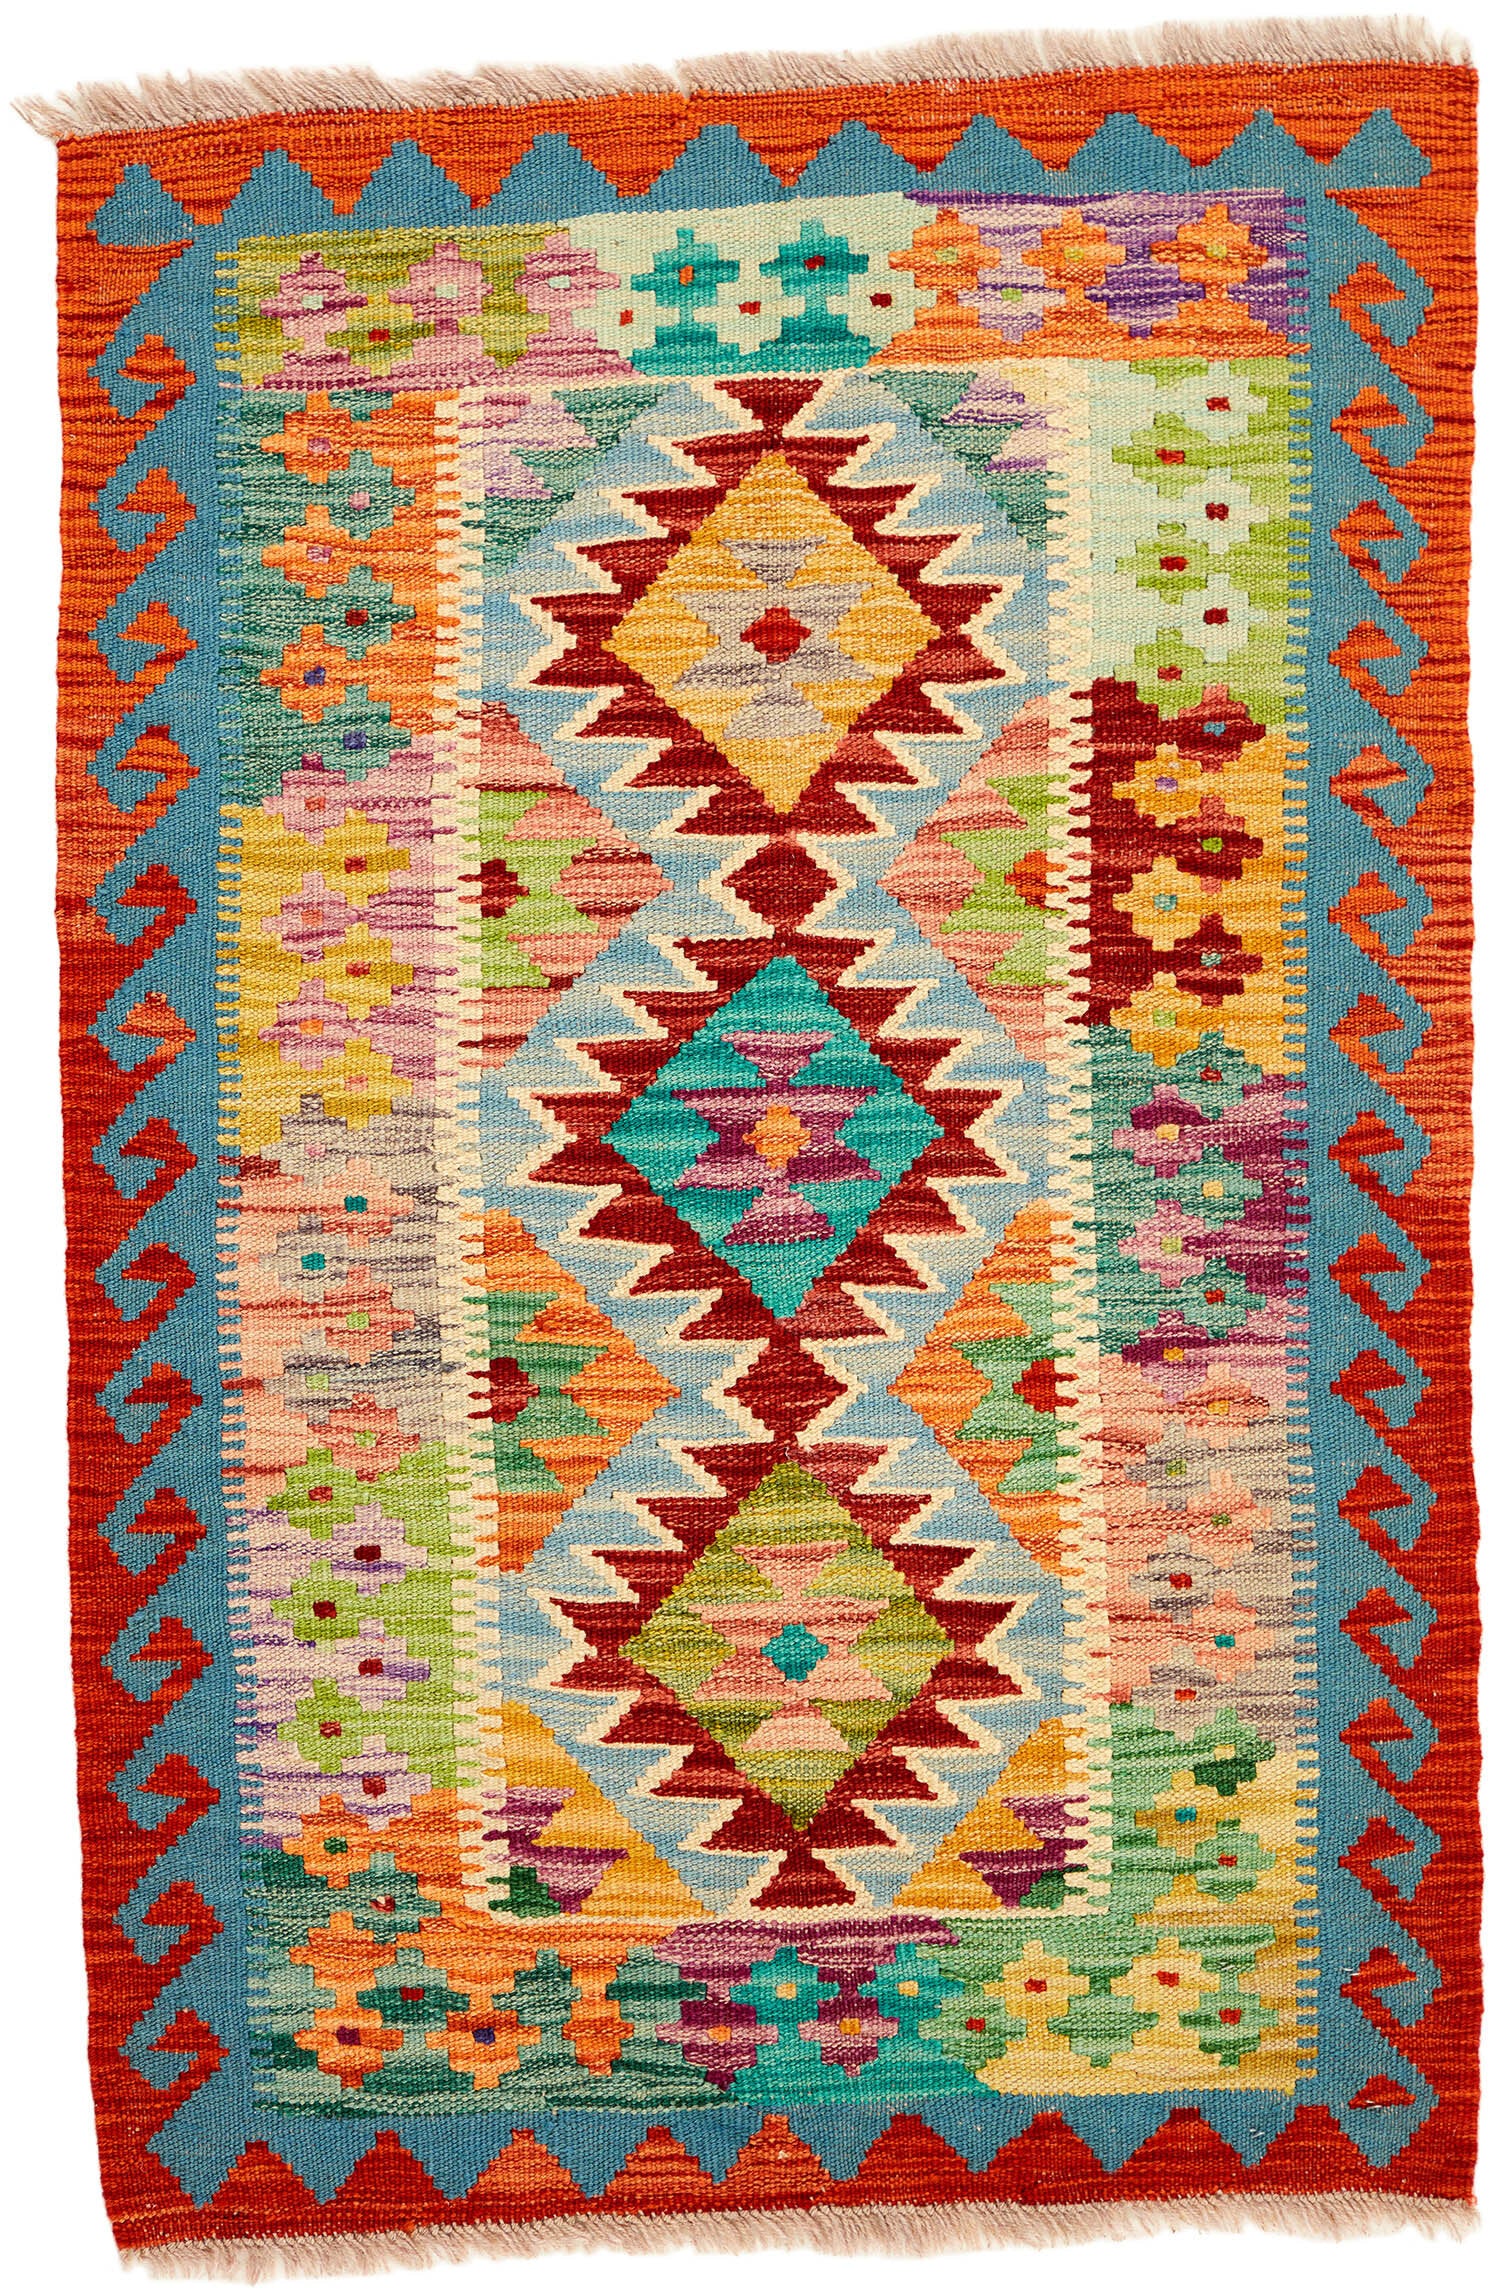 Authentic Persian Kilim flatweave rug with traditional multicolour pattern